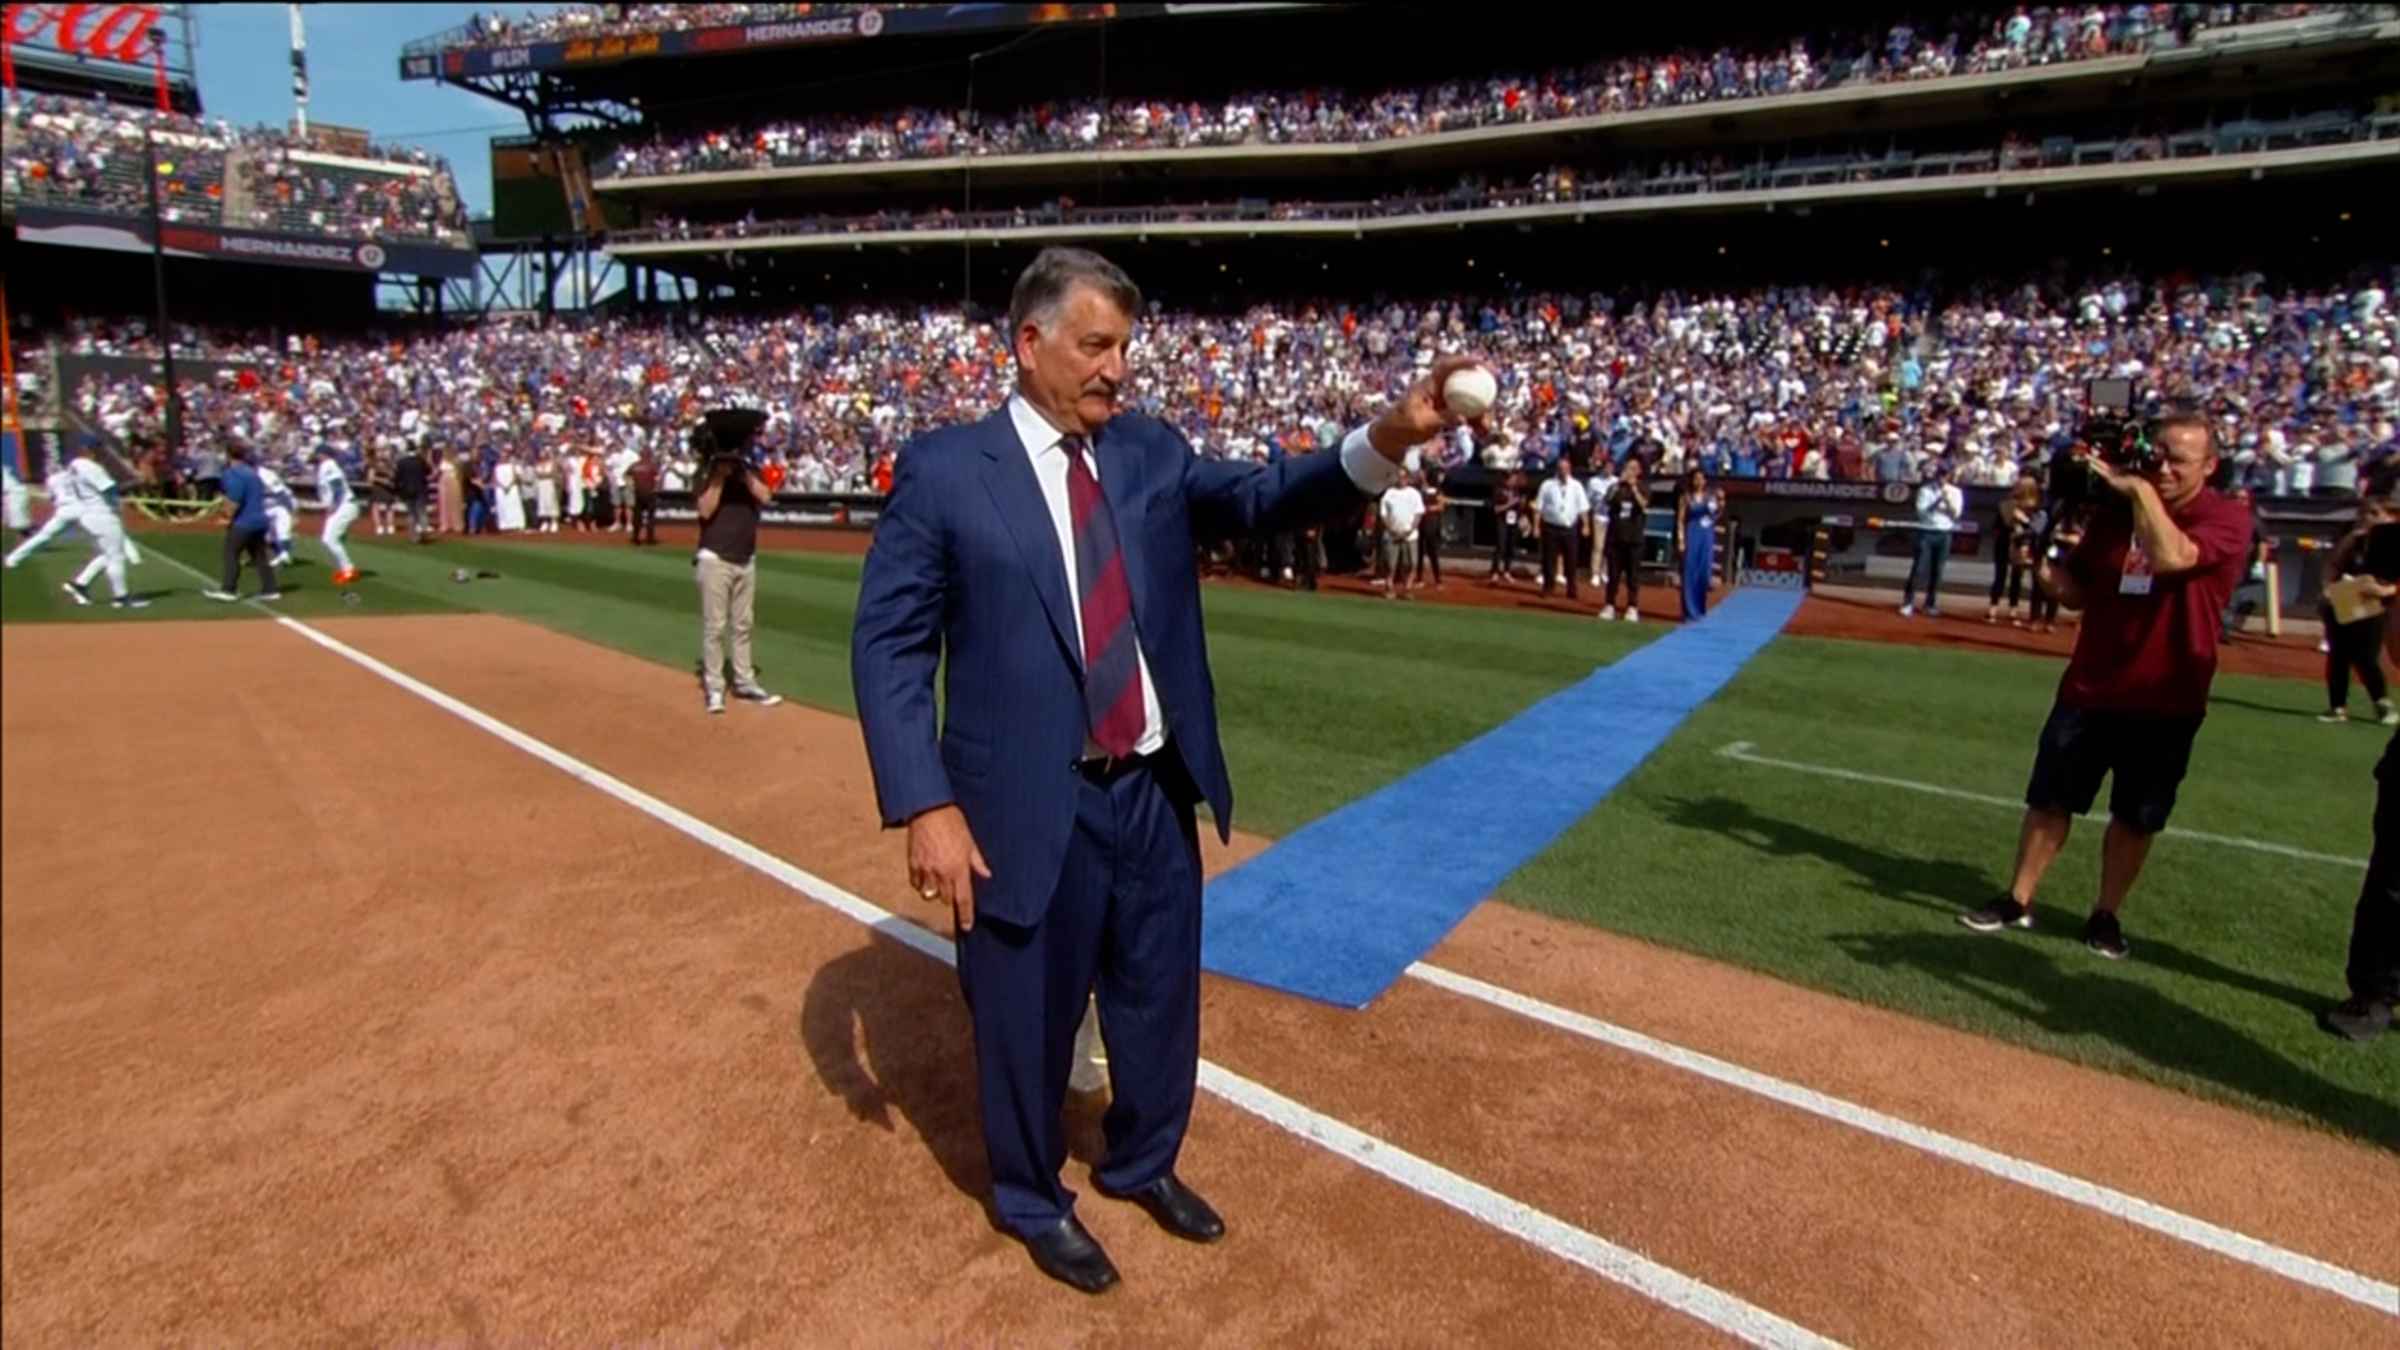 Hernandez fires up Citi Field with first pitch